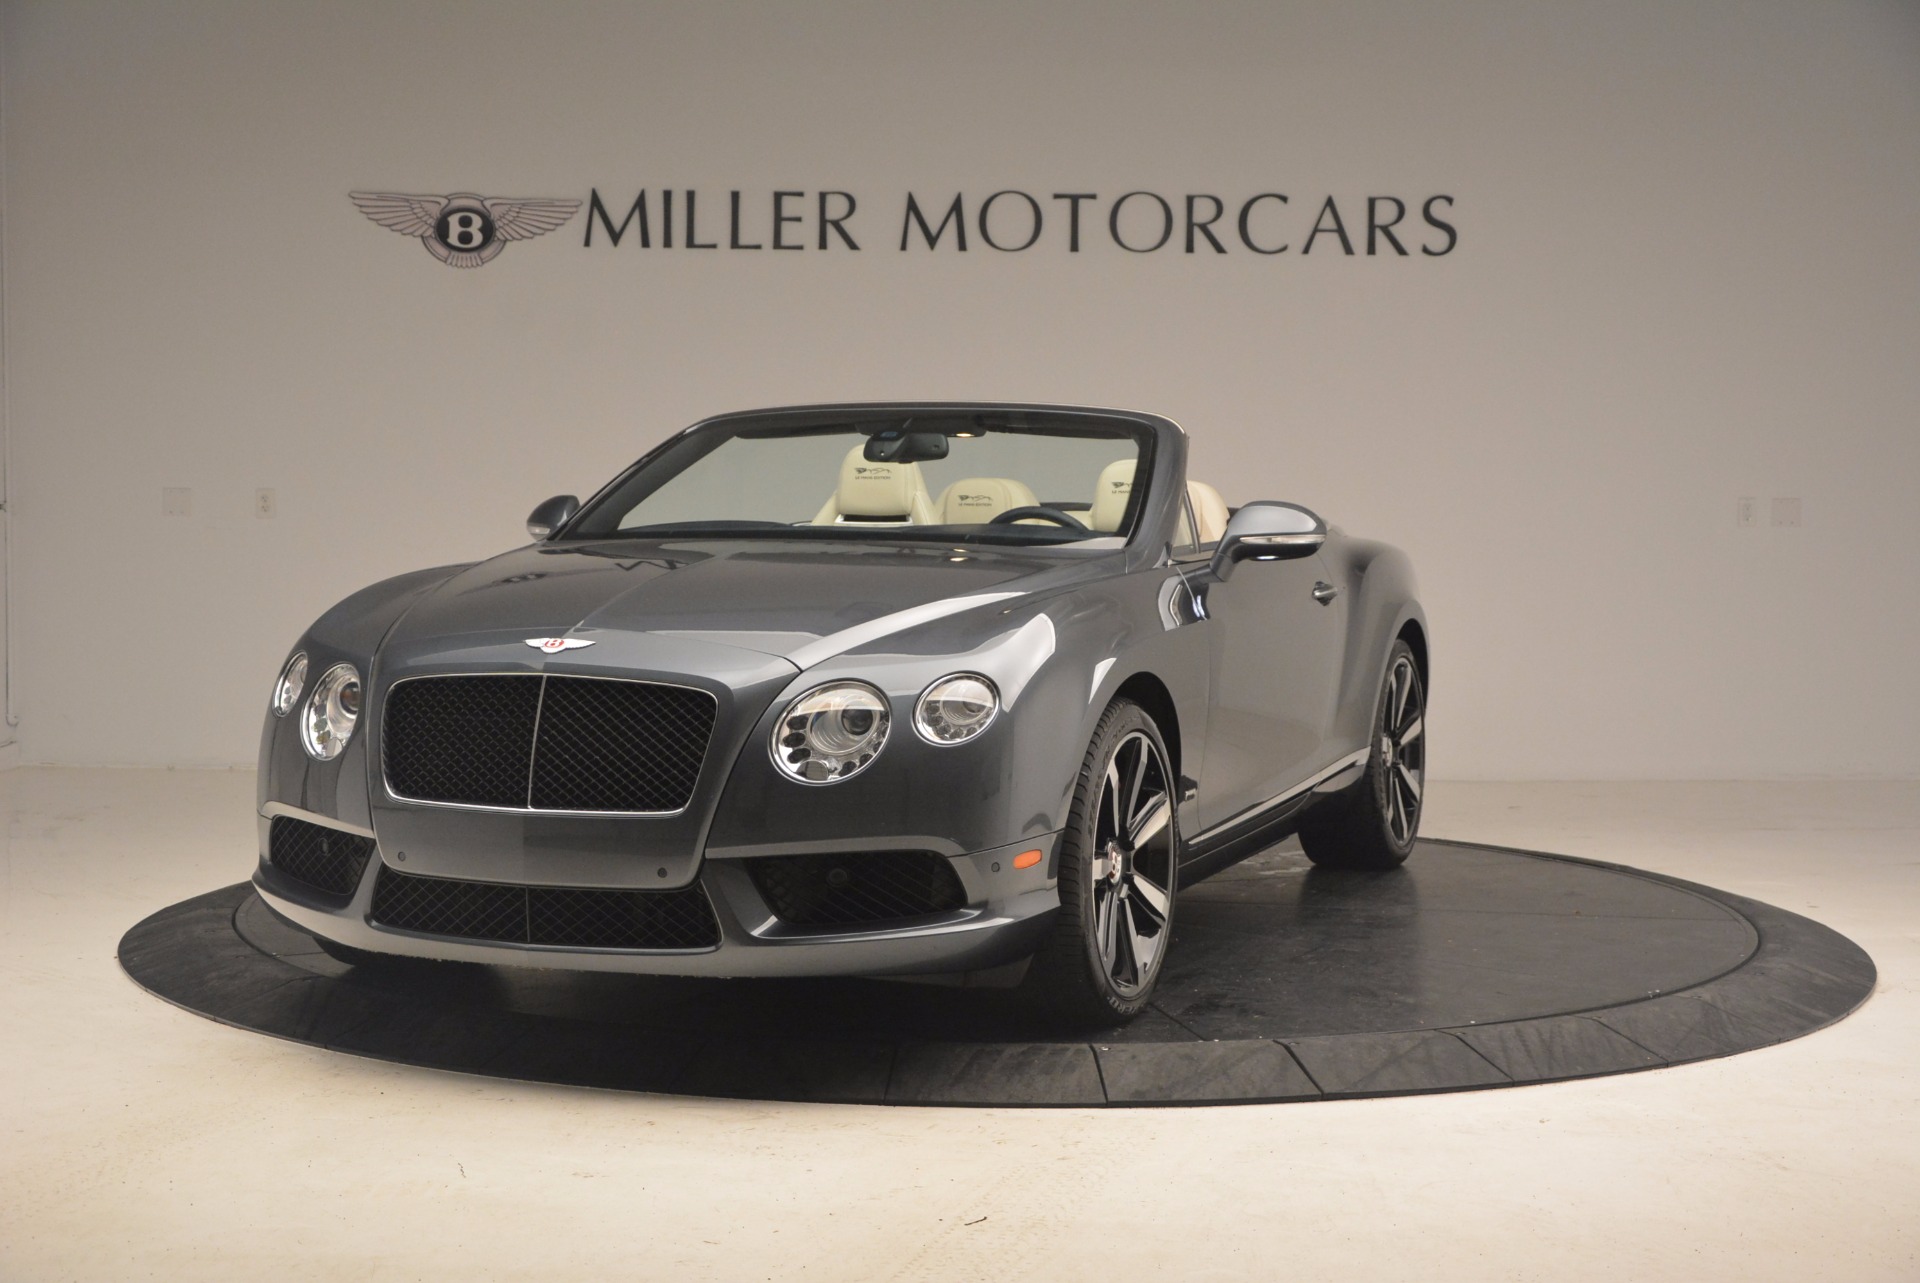 Used 2013 Bentley Continental GT V8 Le Mans Edition, 1 of 48 for sale Sold at Maserati of Westport in Westport CT 06880 1